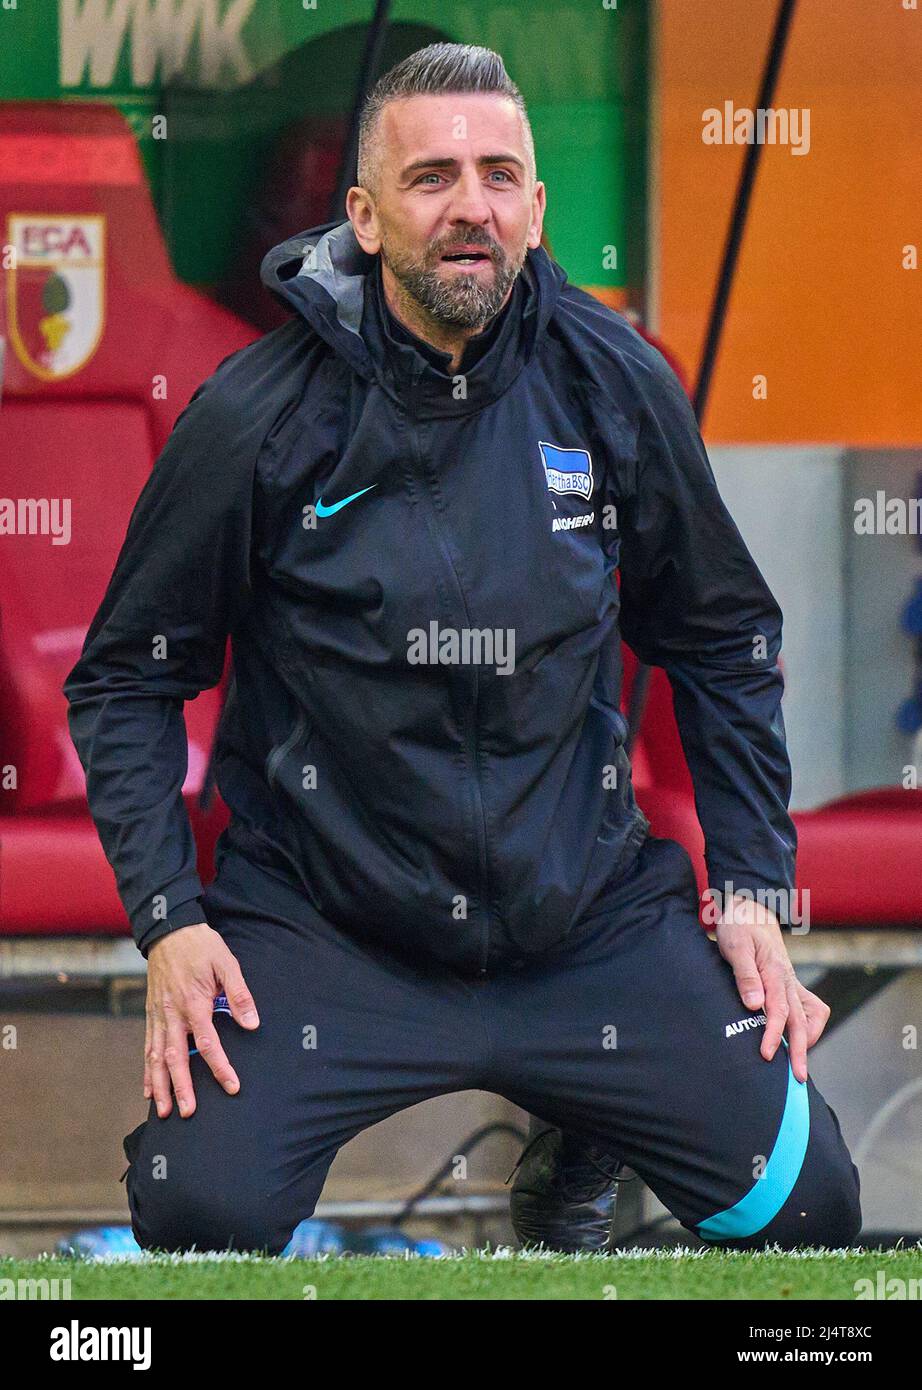 Vedad Ibisevic Hertha assistant coach kneeling in the grass  in the match FC AUGSBURG - HERTHA BSC BERLIN 0-1 1.German Football League on April 16, 2022 in Augsburg, Germany  Season 2021/2022, matchday 30, 1.Bundesliga, 30.Spieltag. © Peter Schatz / Alamy Live News    - DFL REGULATIONS PROHIBIT ANY USE OF PHOTOGRAPHS as IMAGE SEQUENCES and/or QUASI-VIDEO - Stock Photo